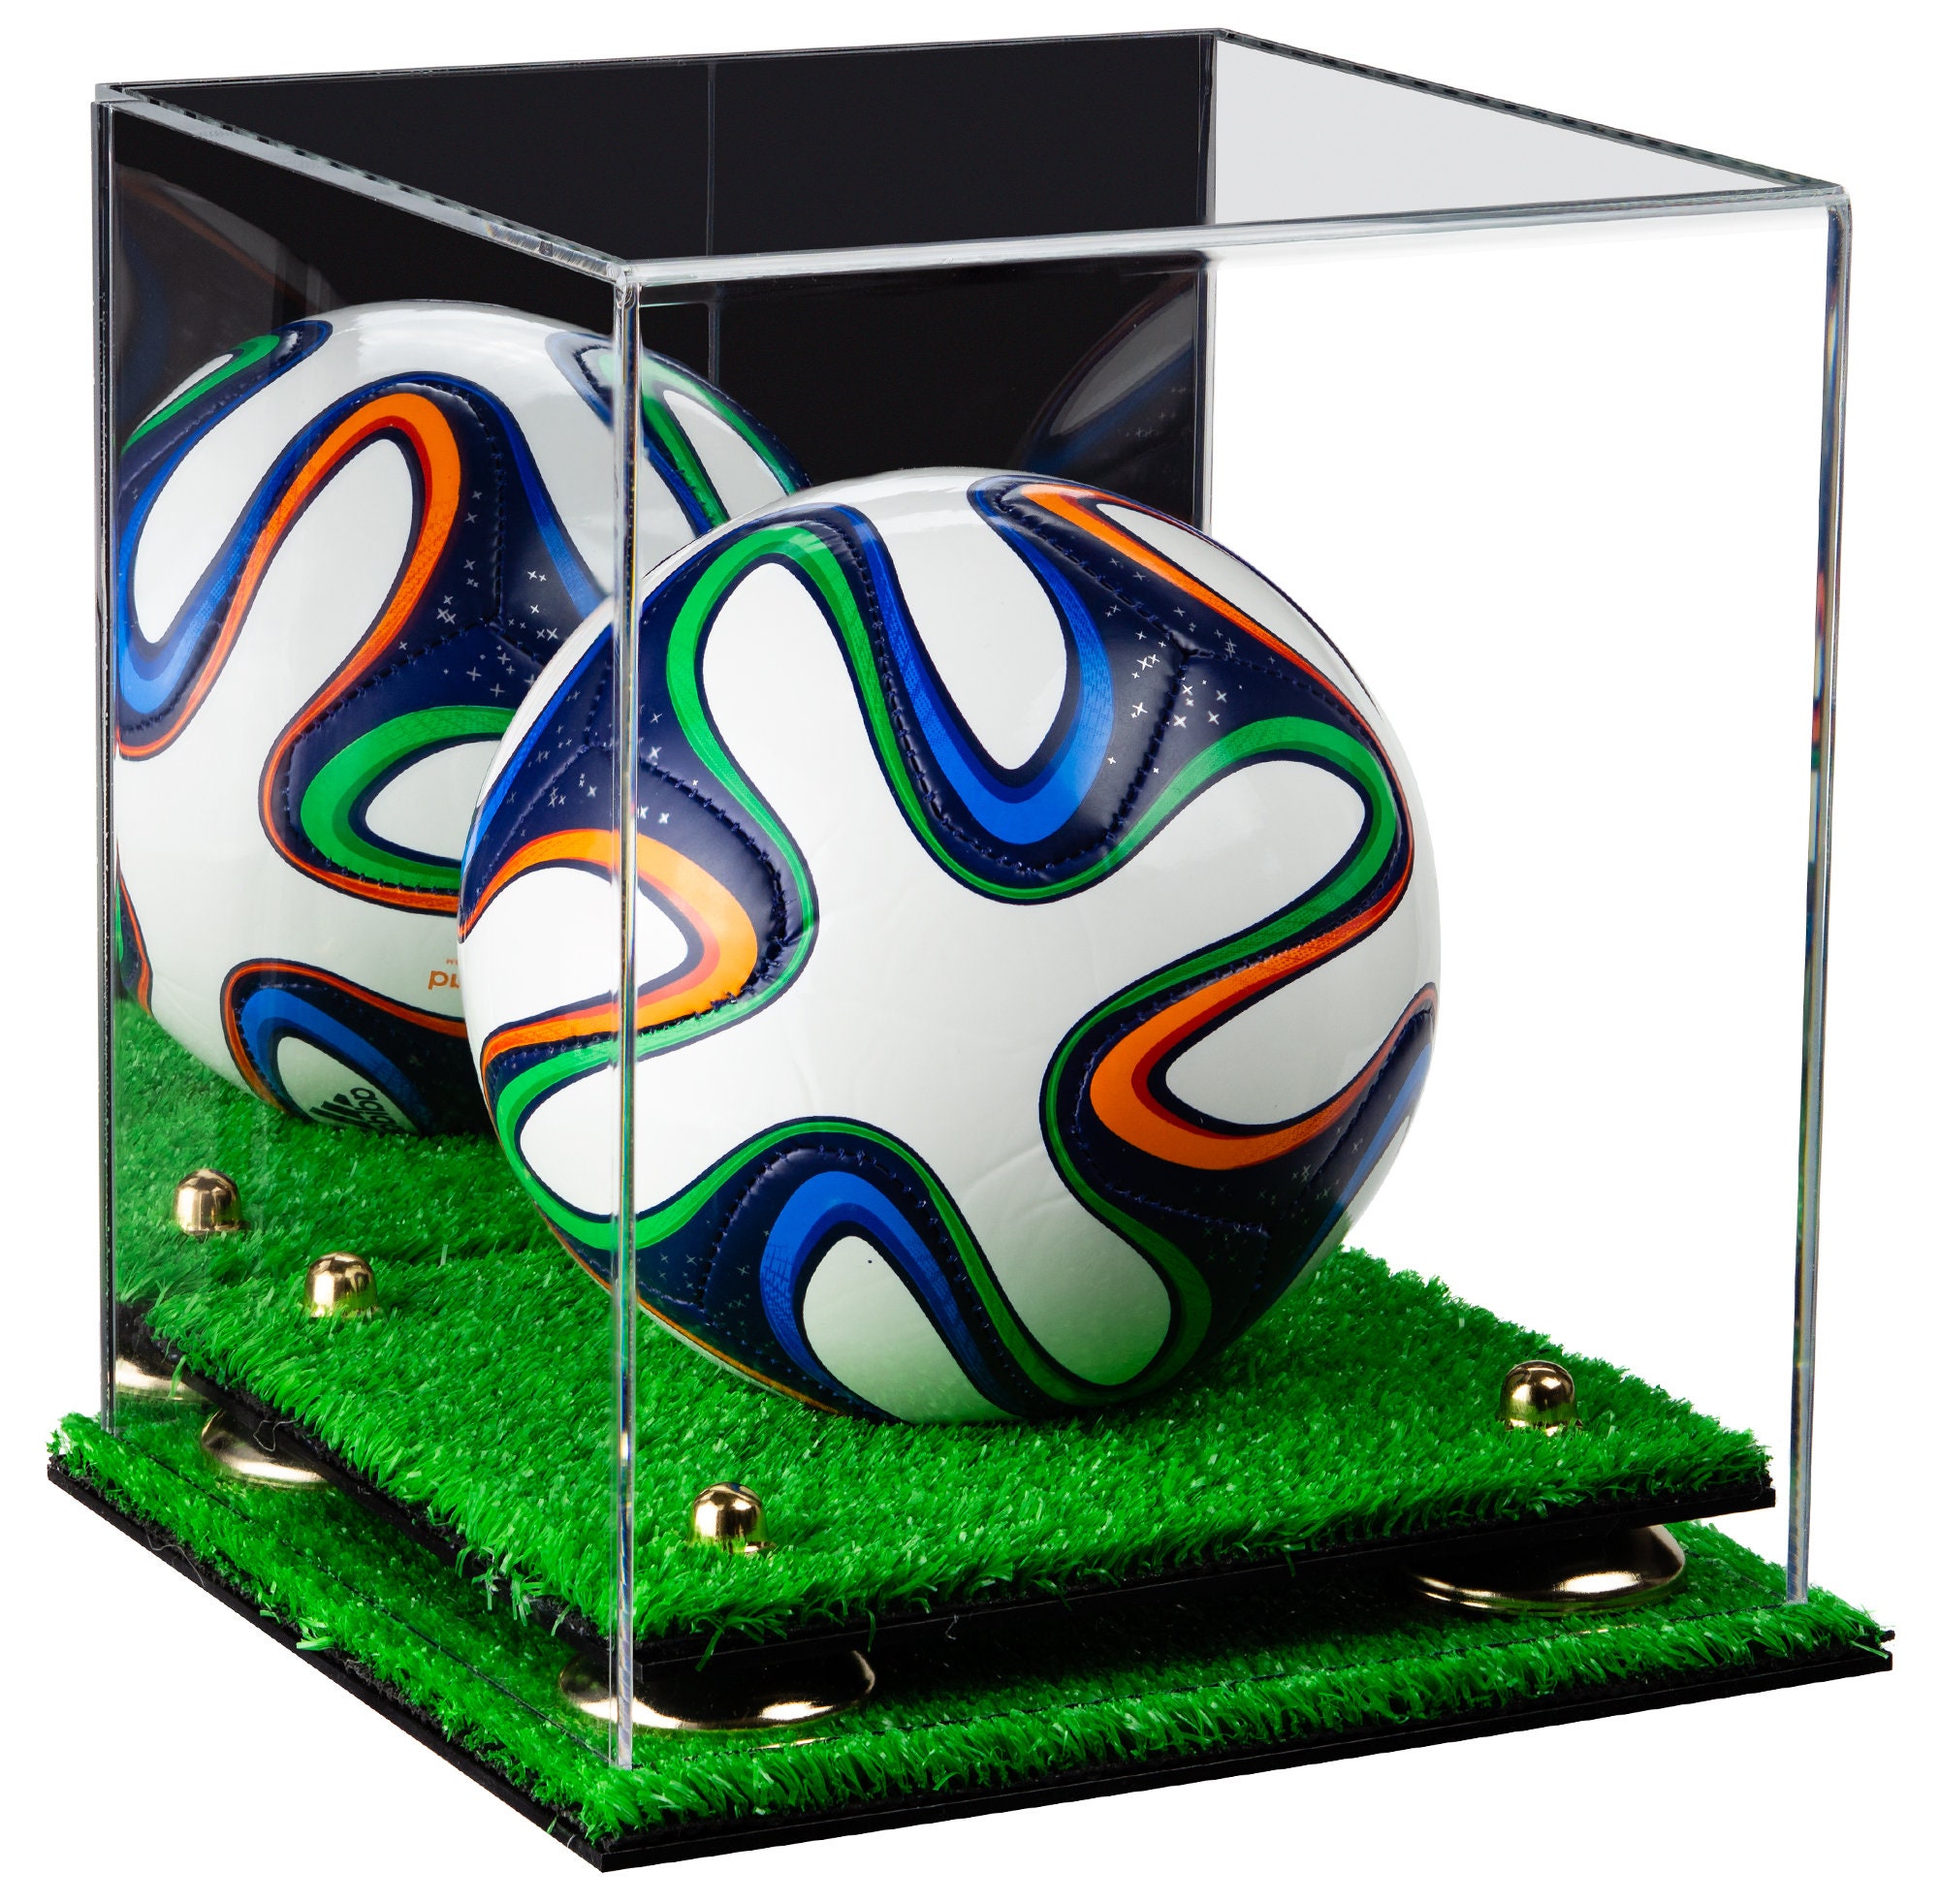 Better Display Cases Acrylic Pool Balls Holder, Shelf or Wall Mount (hd103/a113)